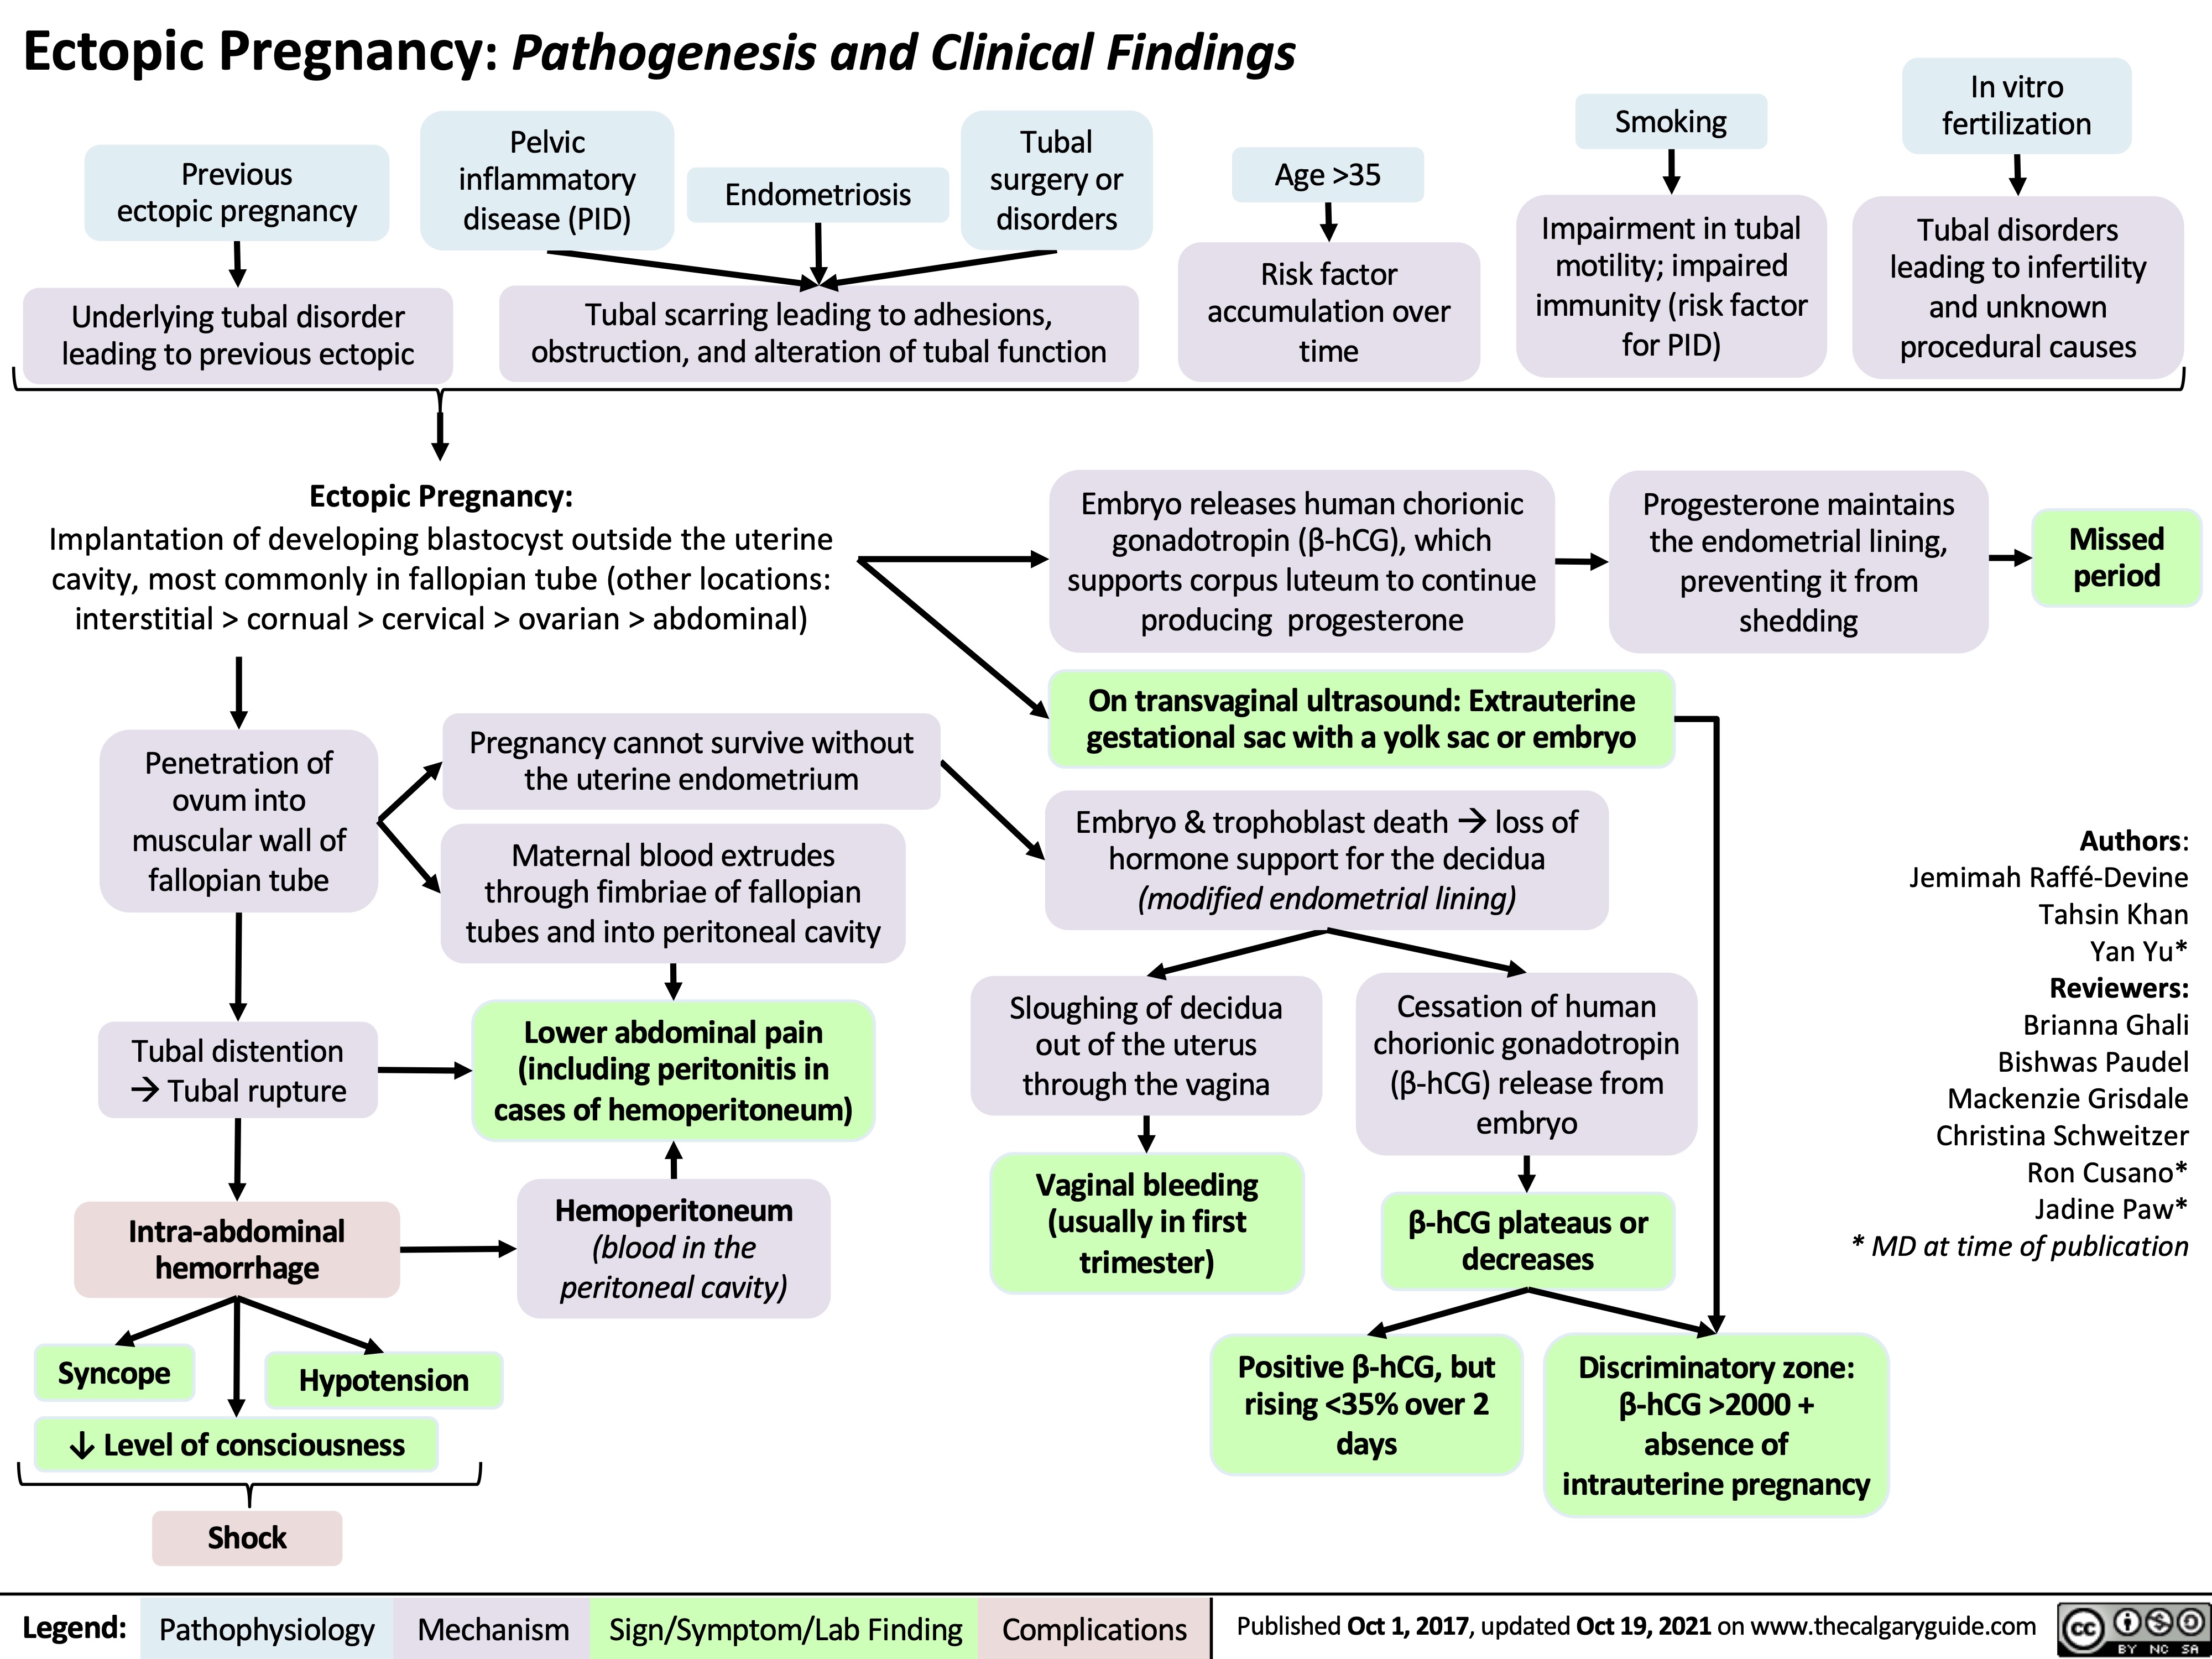 Ectopic Pregnancy: Pathogenesis and Clinical Findings
In vitro fertilization
Tubal disorders leading to infertility and unknown procedural causes
      Previous ectopic pregnancy
Underlying tubal disorder leading to previous ectopic
Pelvic inflammatory disease (PID)
Endometriosis
Tubal surgery or disorders
Age >35
Risk factor accumulation over time
Smoking
Impairment in tubal motility; impaired immunity (risk factor for PID)
        Tubal scarring leading to adhesions, obstruction, and alteration of tubal function
   Ectopic Pregnancy:
Implantation of developing blastocyst outside the uterine cavity, most commonly in fallopian tube (other locations: interstitial > cornual > cervical > ovarian > abdominal)
Embryo releases human chorionic gonadotropin (β-hCG), which supports corpus luteum to continue producing progesterone
On transvaginal ultrasound: Extrauterine gestational sac with a yolk sac or embryo
Embryo & trophoblast deathàloss of hormone support for the decidua (modified endometrial lining)
Progesterone maintains the endometrial lining, preventing it from shedding
Missed period
       Penetration of ovum into muscular wall of fallopian tube
Tubal distention àTubal rupture
Intra-abdominal hemorrhage
Pregnancy cannot survive without the uterine endometrium
Maternal blood extrudes through fimbriae of fallopian tubes and into peritoneal cavity
Lower abdominal pain (including peritonitis in cases of hemoperitoneum)
Hemoperitoneum
(blood in the peritoneal cavity)
Sloughing of decidua out of the uterus through the vagina
Vaginal bleeding (usually in first trimester)
Cessation of human chorionic gonadotropin (β-hCG) release from embryo
β-hCG plateaus or decreases
Authors: Jemimah Raffé-Devine Tahsin Khan Yan Yu* Reviewers: Brianna Ghali Bishwas Paudel Mackenzie Grisdale Christina Schweitzer Ron Cusano* Jadine Paw* * MD at time of publication
                     Syncope
↓ Level of consciousness
Positive β-hCG, but rising <35% over 2 days
Discriminatory zone: β-hCG >2000 + absence of intrauterine pregnancy
 Hypotension
   Shock
 Legend:
 Pathophysiology
 Mechanism
Sign/Symptom/Lab Finding
 Complications
 Published Oct 1, 2017, updated Oct 19, 2021 on www.thecalgaryguide.com
  